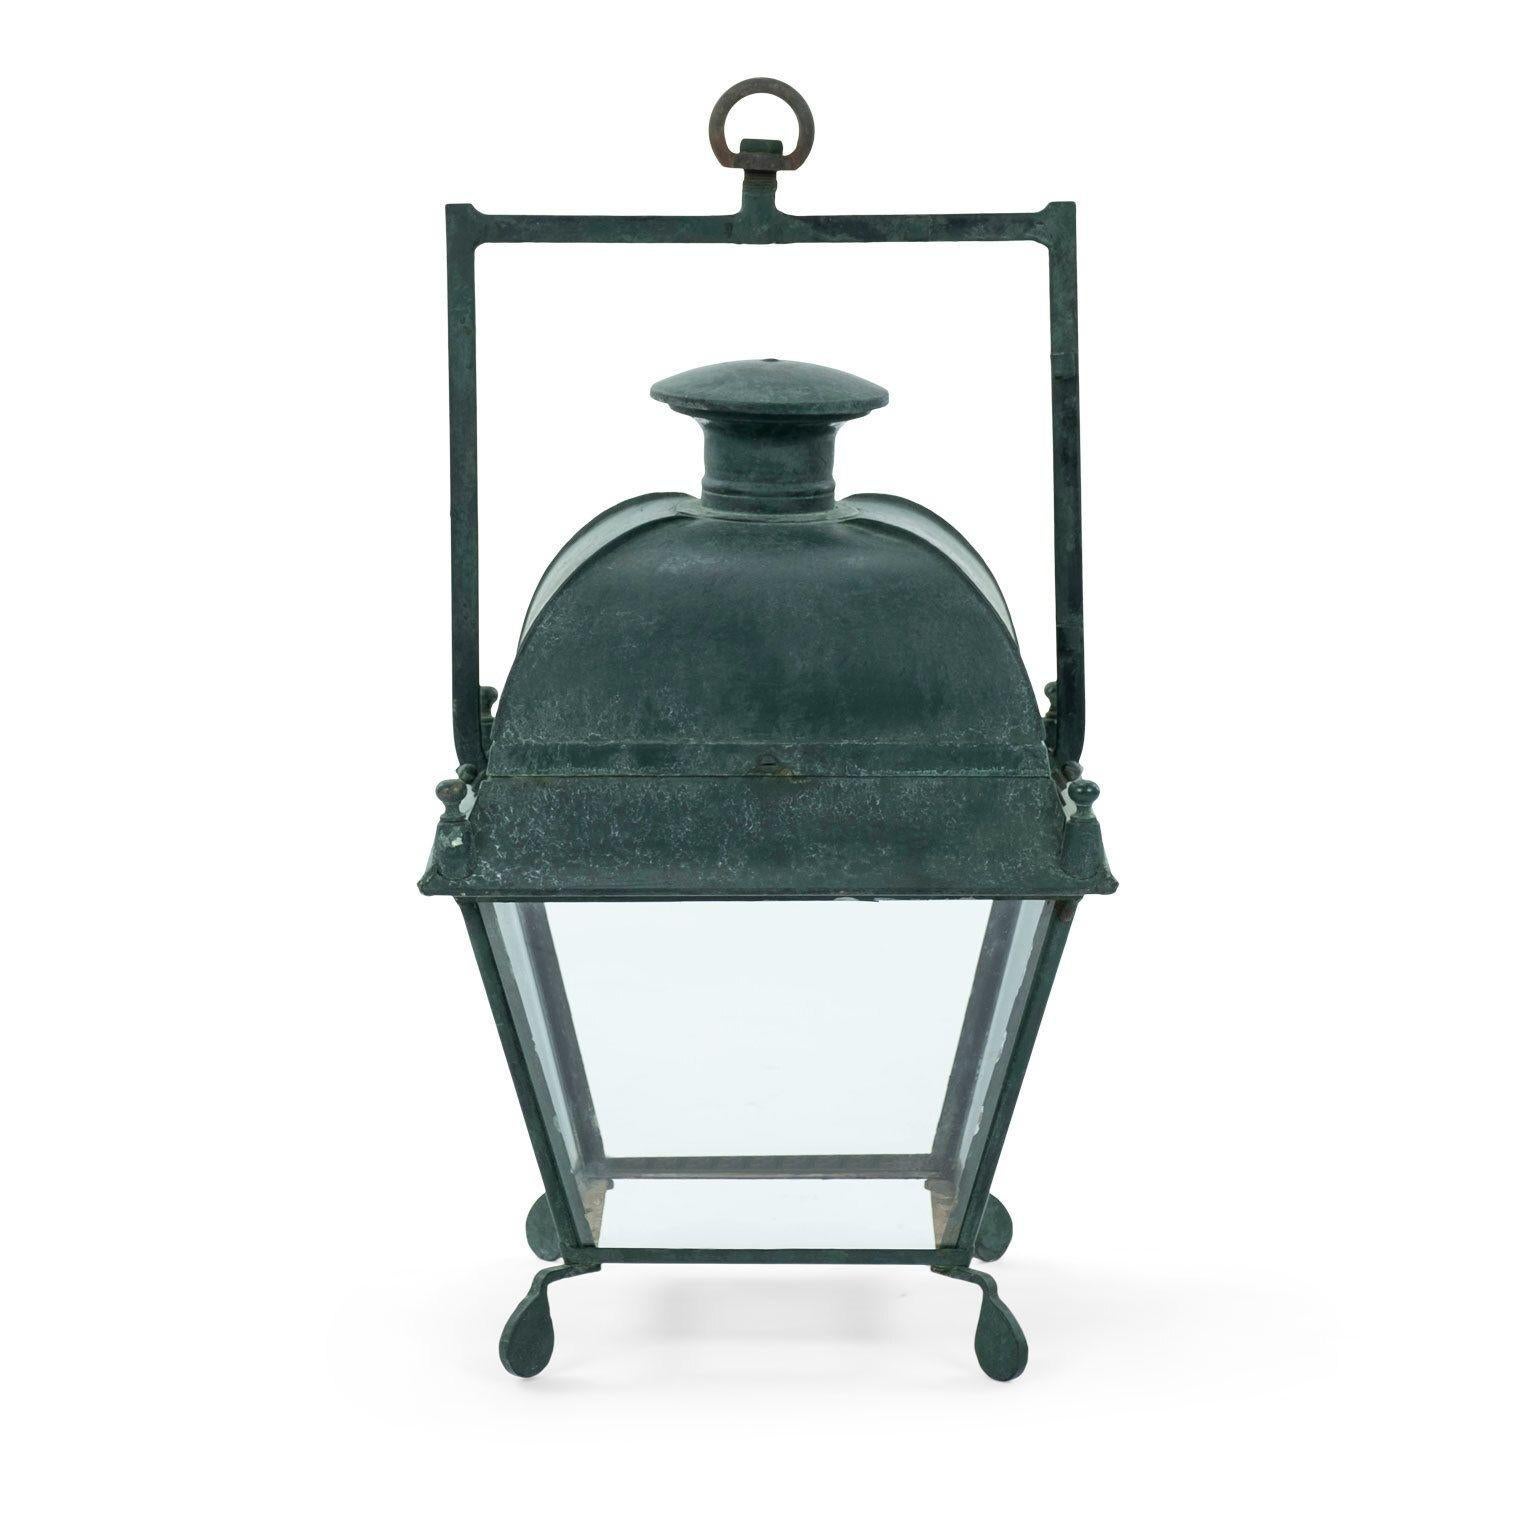 Green-painted French tole stable lantern with domed top and four glass paneled sides. Dates to early 20th century. Not wired. Two available (last three images show lanterns ref. 1013A and 1013B together) but sold individually priced $3,800